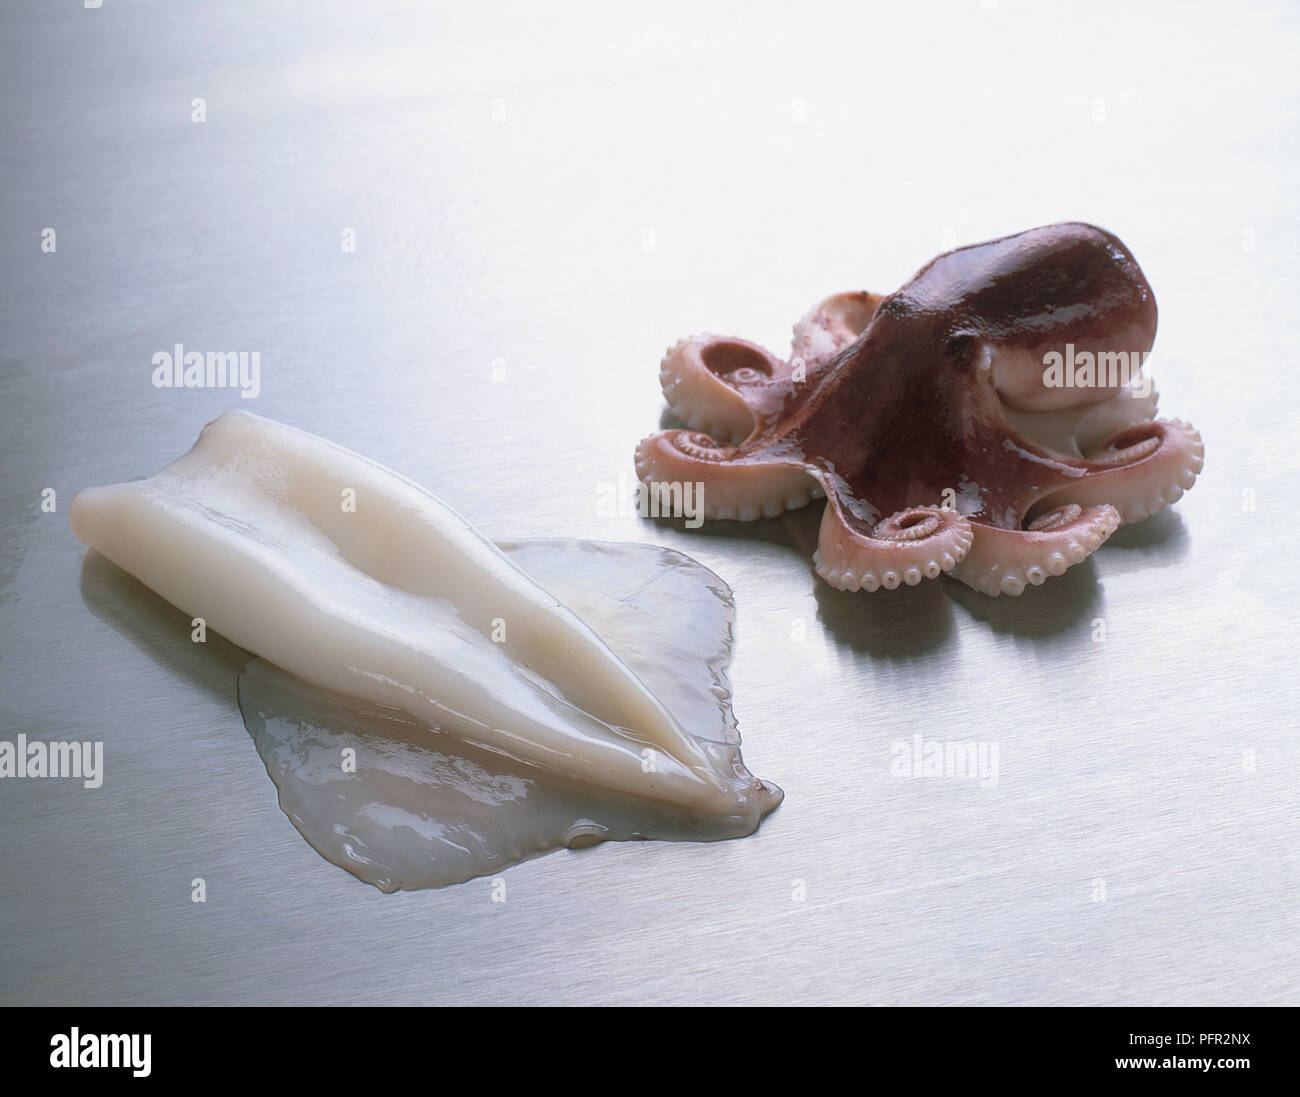 Fresh Squid And Baby Octopus On Stainless Steel Kitchen Worktop Stock Photo Alamy